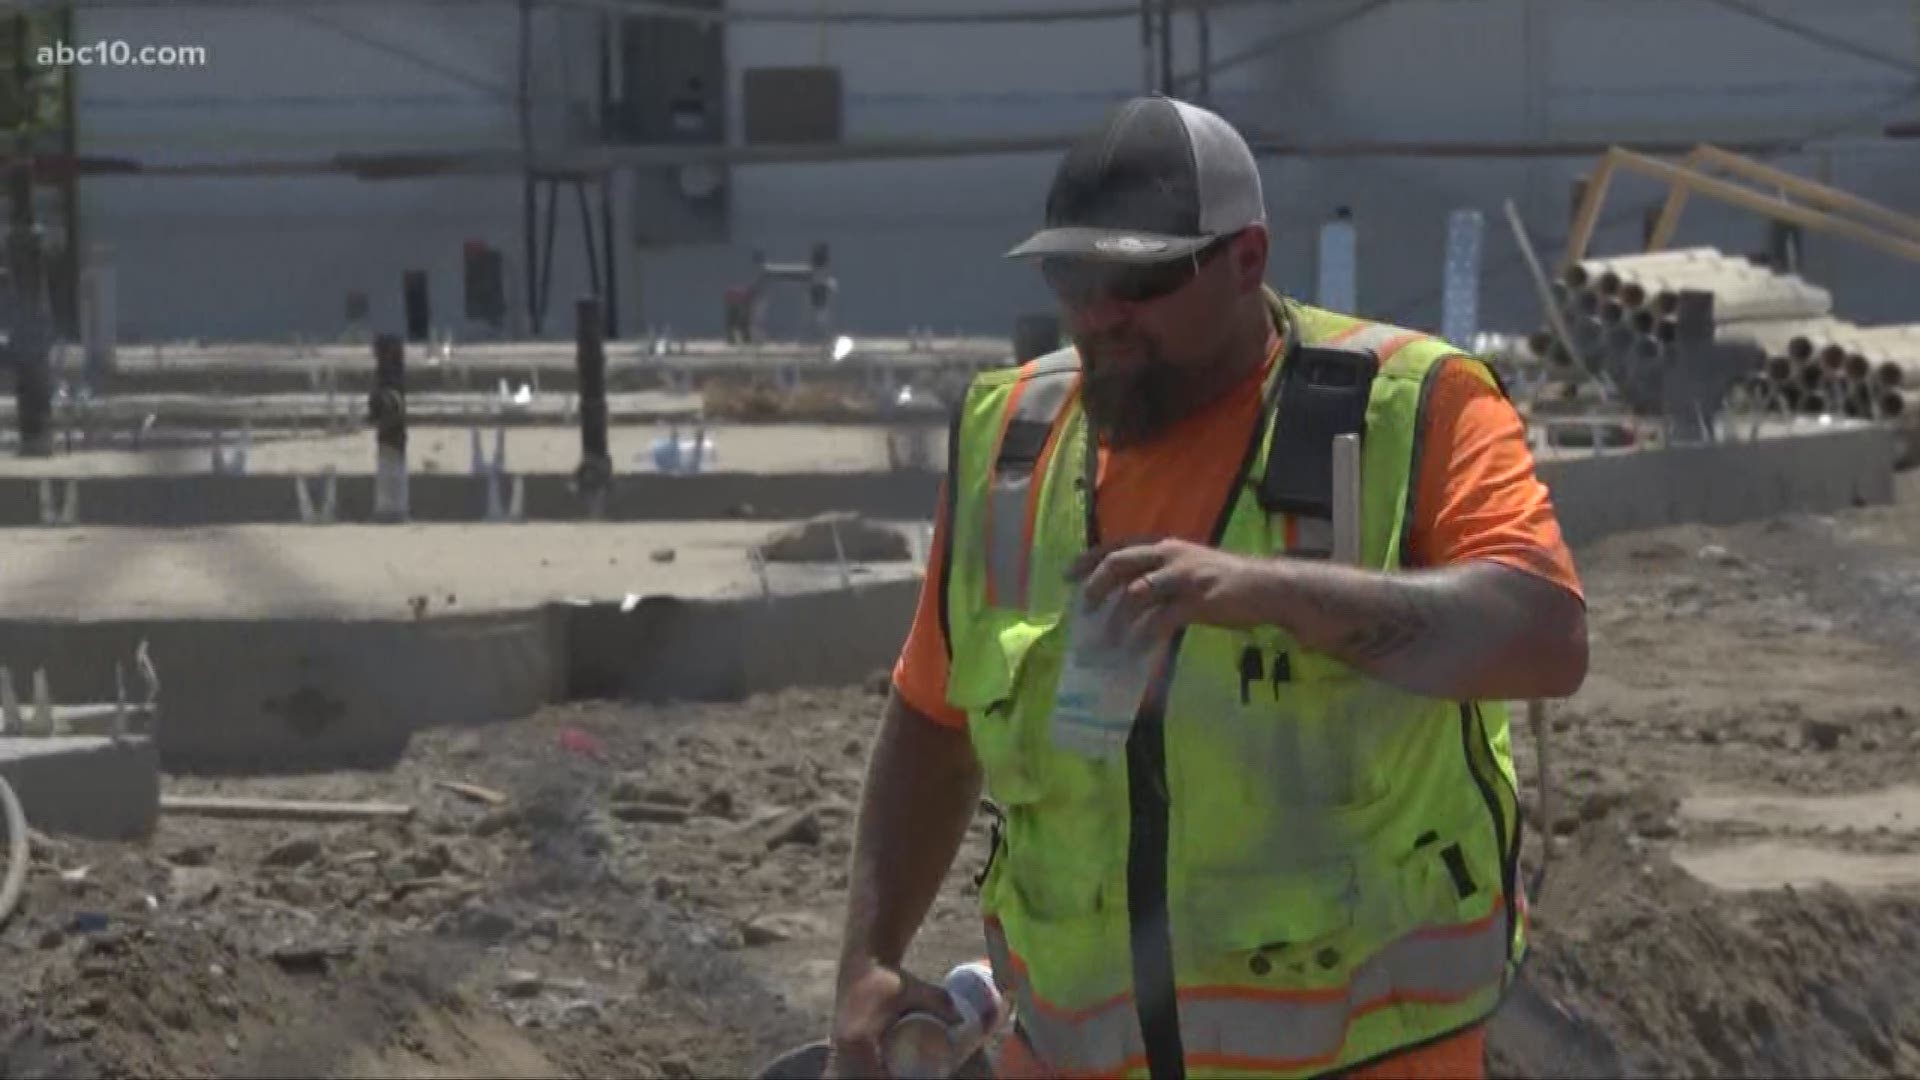 The California Occupational Safety and Health Administration (Cal/OSHA) advises employers to take precautionary measures to protect outdoor workers from heat illness.